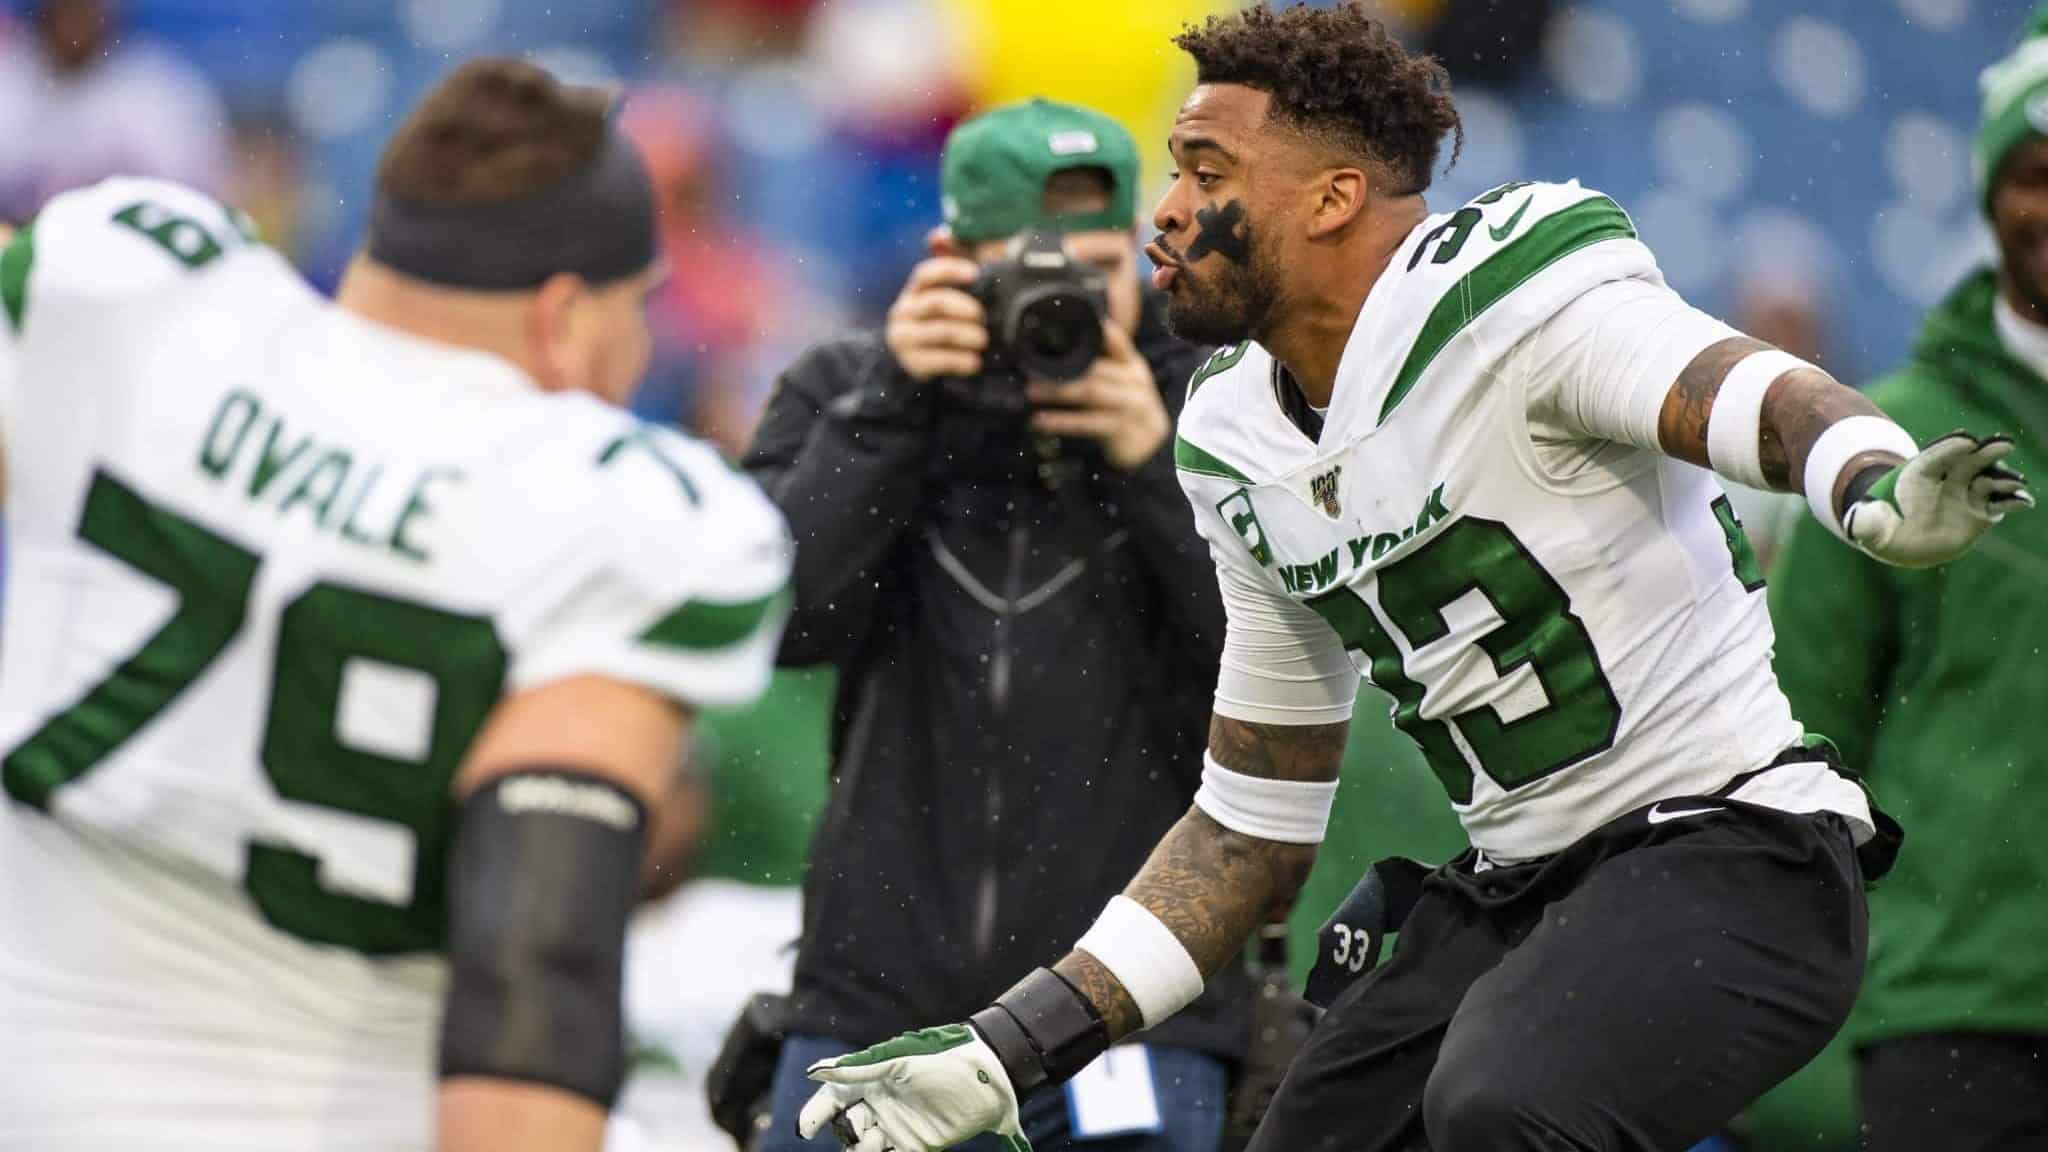 ORCHARD PARK, NY - DECEMBER 29: Jamal Adams #33 of the New York Jets dances to stadium music before the game against the Buffalo Bills at New Era Field on December 29, 2019 in Orchard Park, New York.